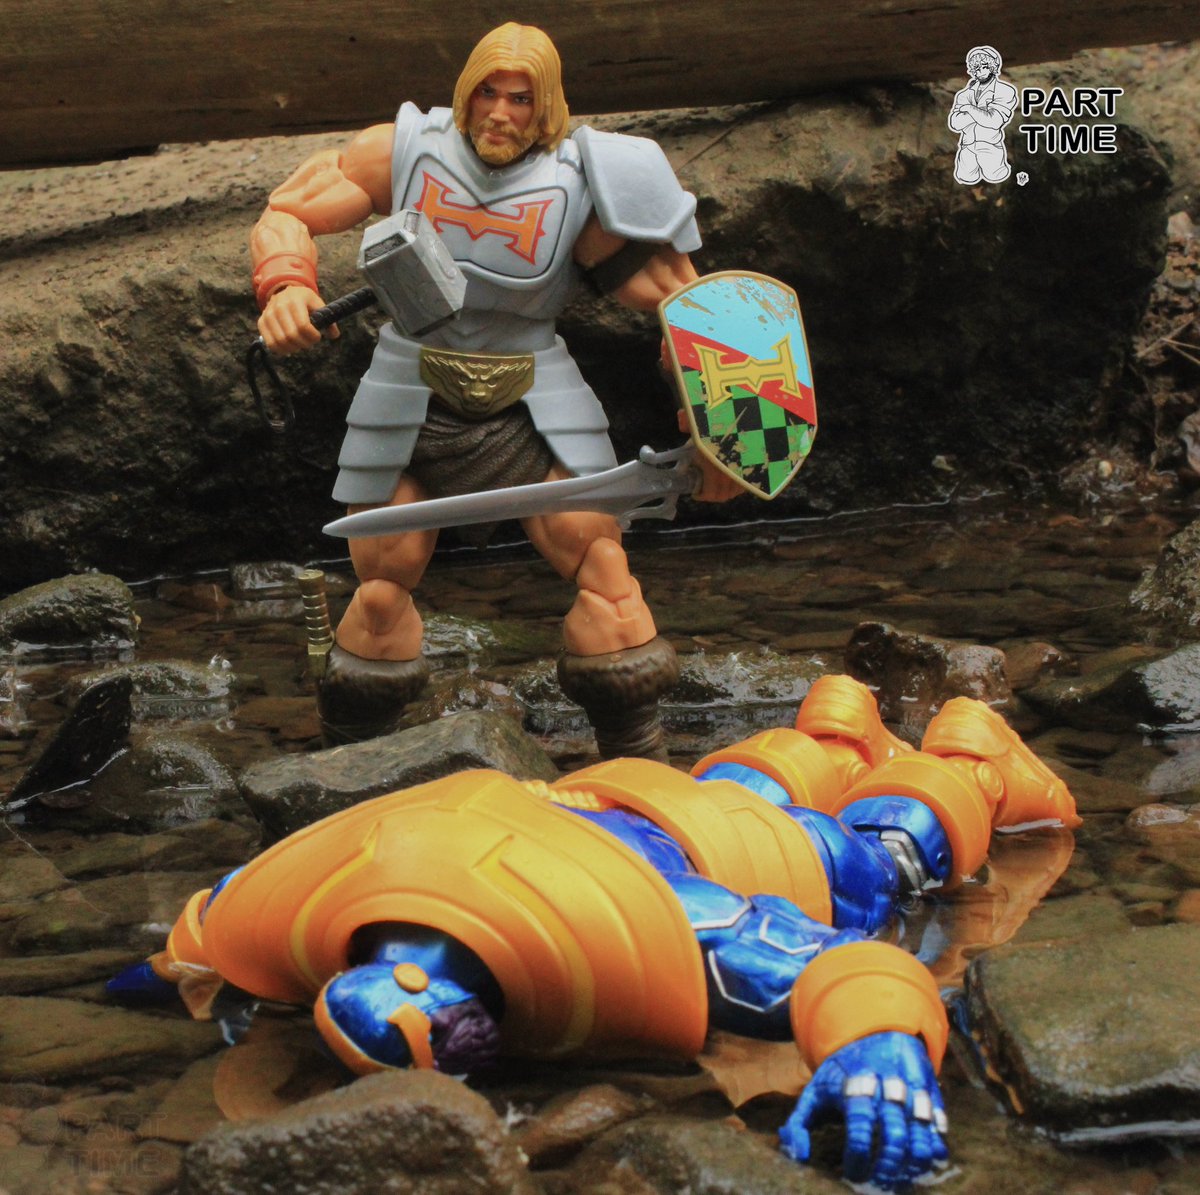 A hero from earth lent me a weapon to assist in stopping you.
#heman #thanos #hemanandthemastersoftheuniverse #motu #mattel #hasbro #marvel #marvellegends #hasbromarvellegends #hemanphotography #hemanneweternia #neweternia #Mjölnir  #actionfigurephotography #toyphotography